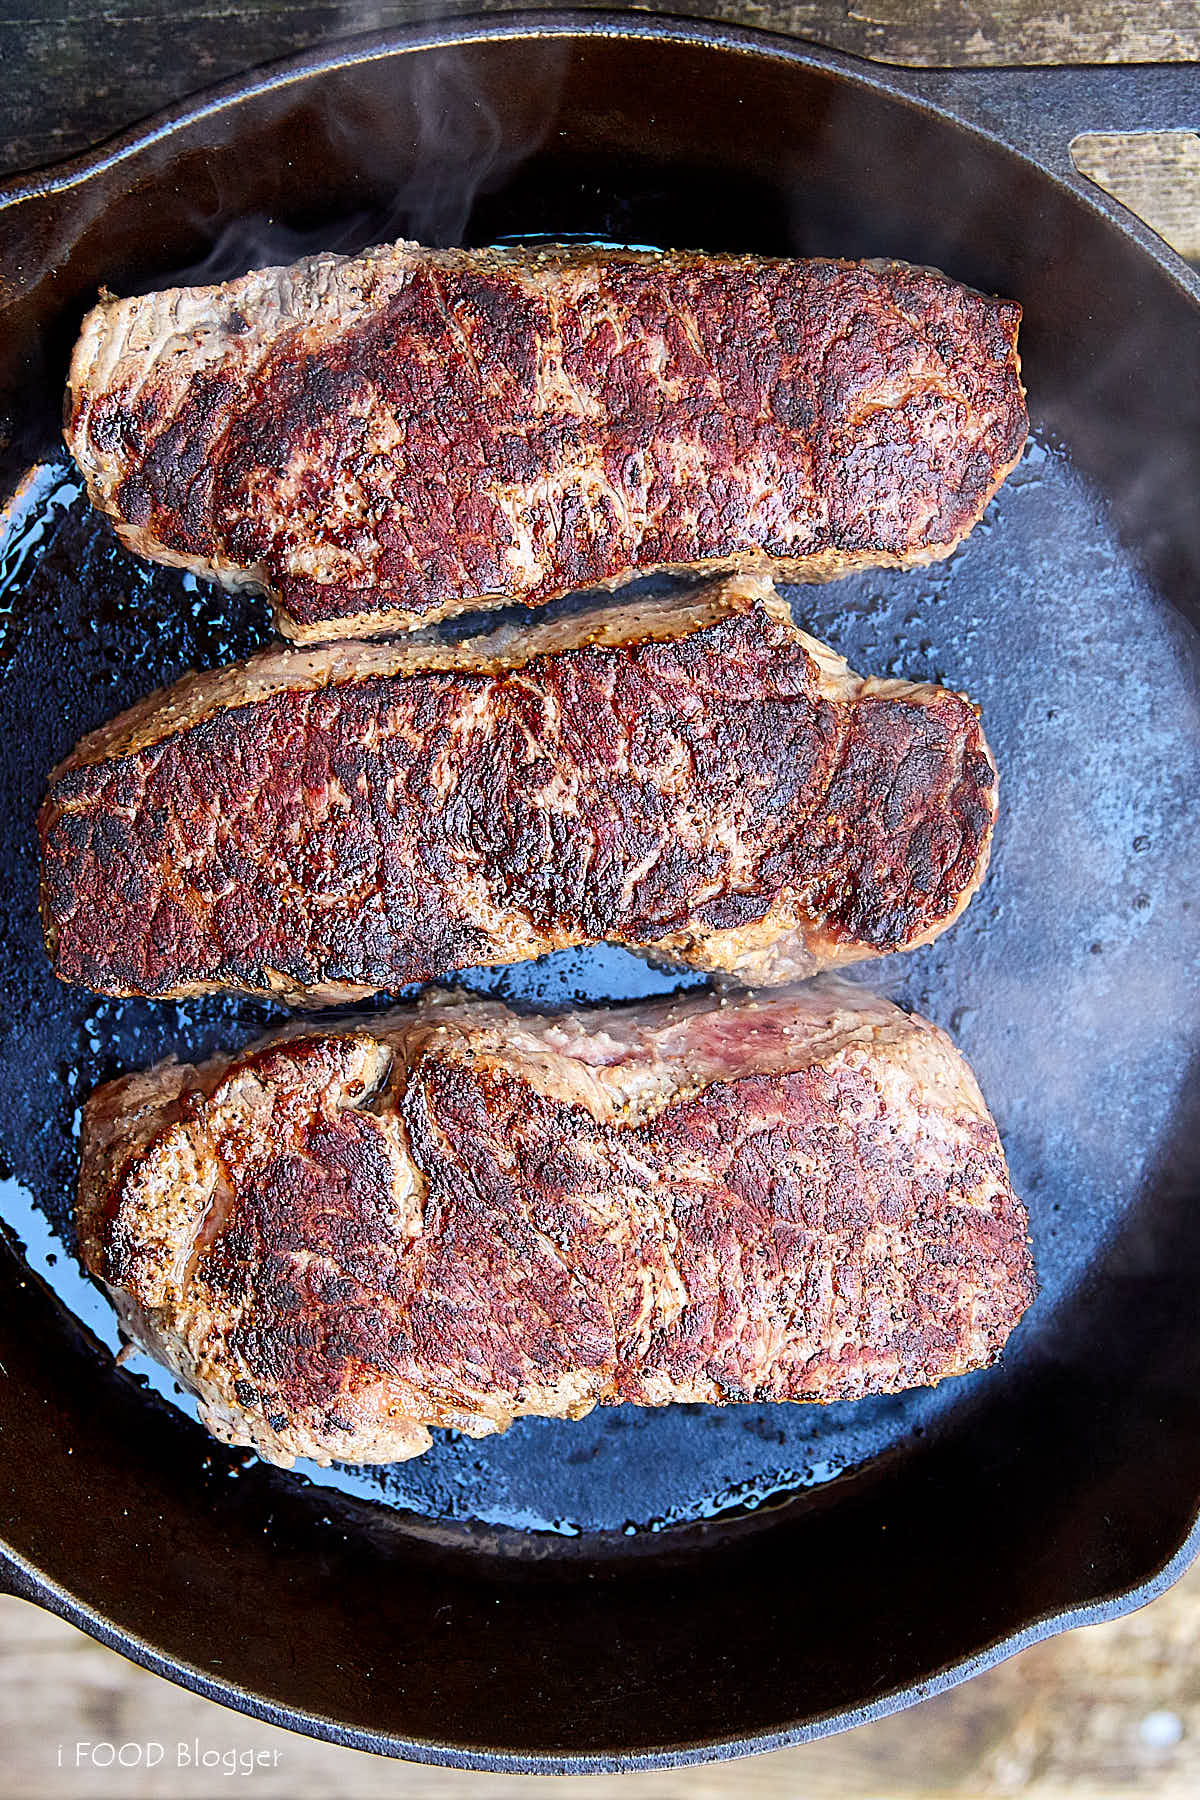 Learn how to make a perfect steak on the stove with this easy to follow guide.The best way to cook a steak indoors is to start with pan searing and finish in the oven. The steak will be perfectly caramelized on the outside and tender inside. Then let it rest and finish quickly in the oven. This will give the a perfectly cooked, tender and juicy steak every time. The best steak ever. | ifoodblogger.com